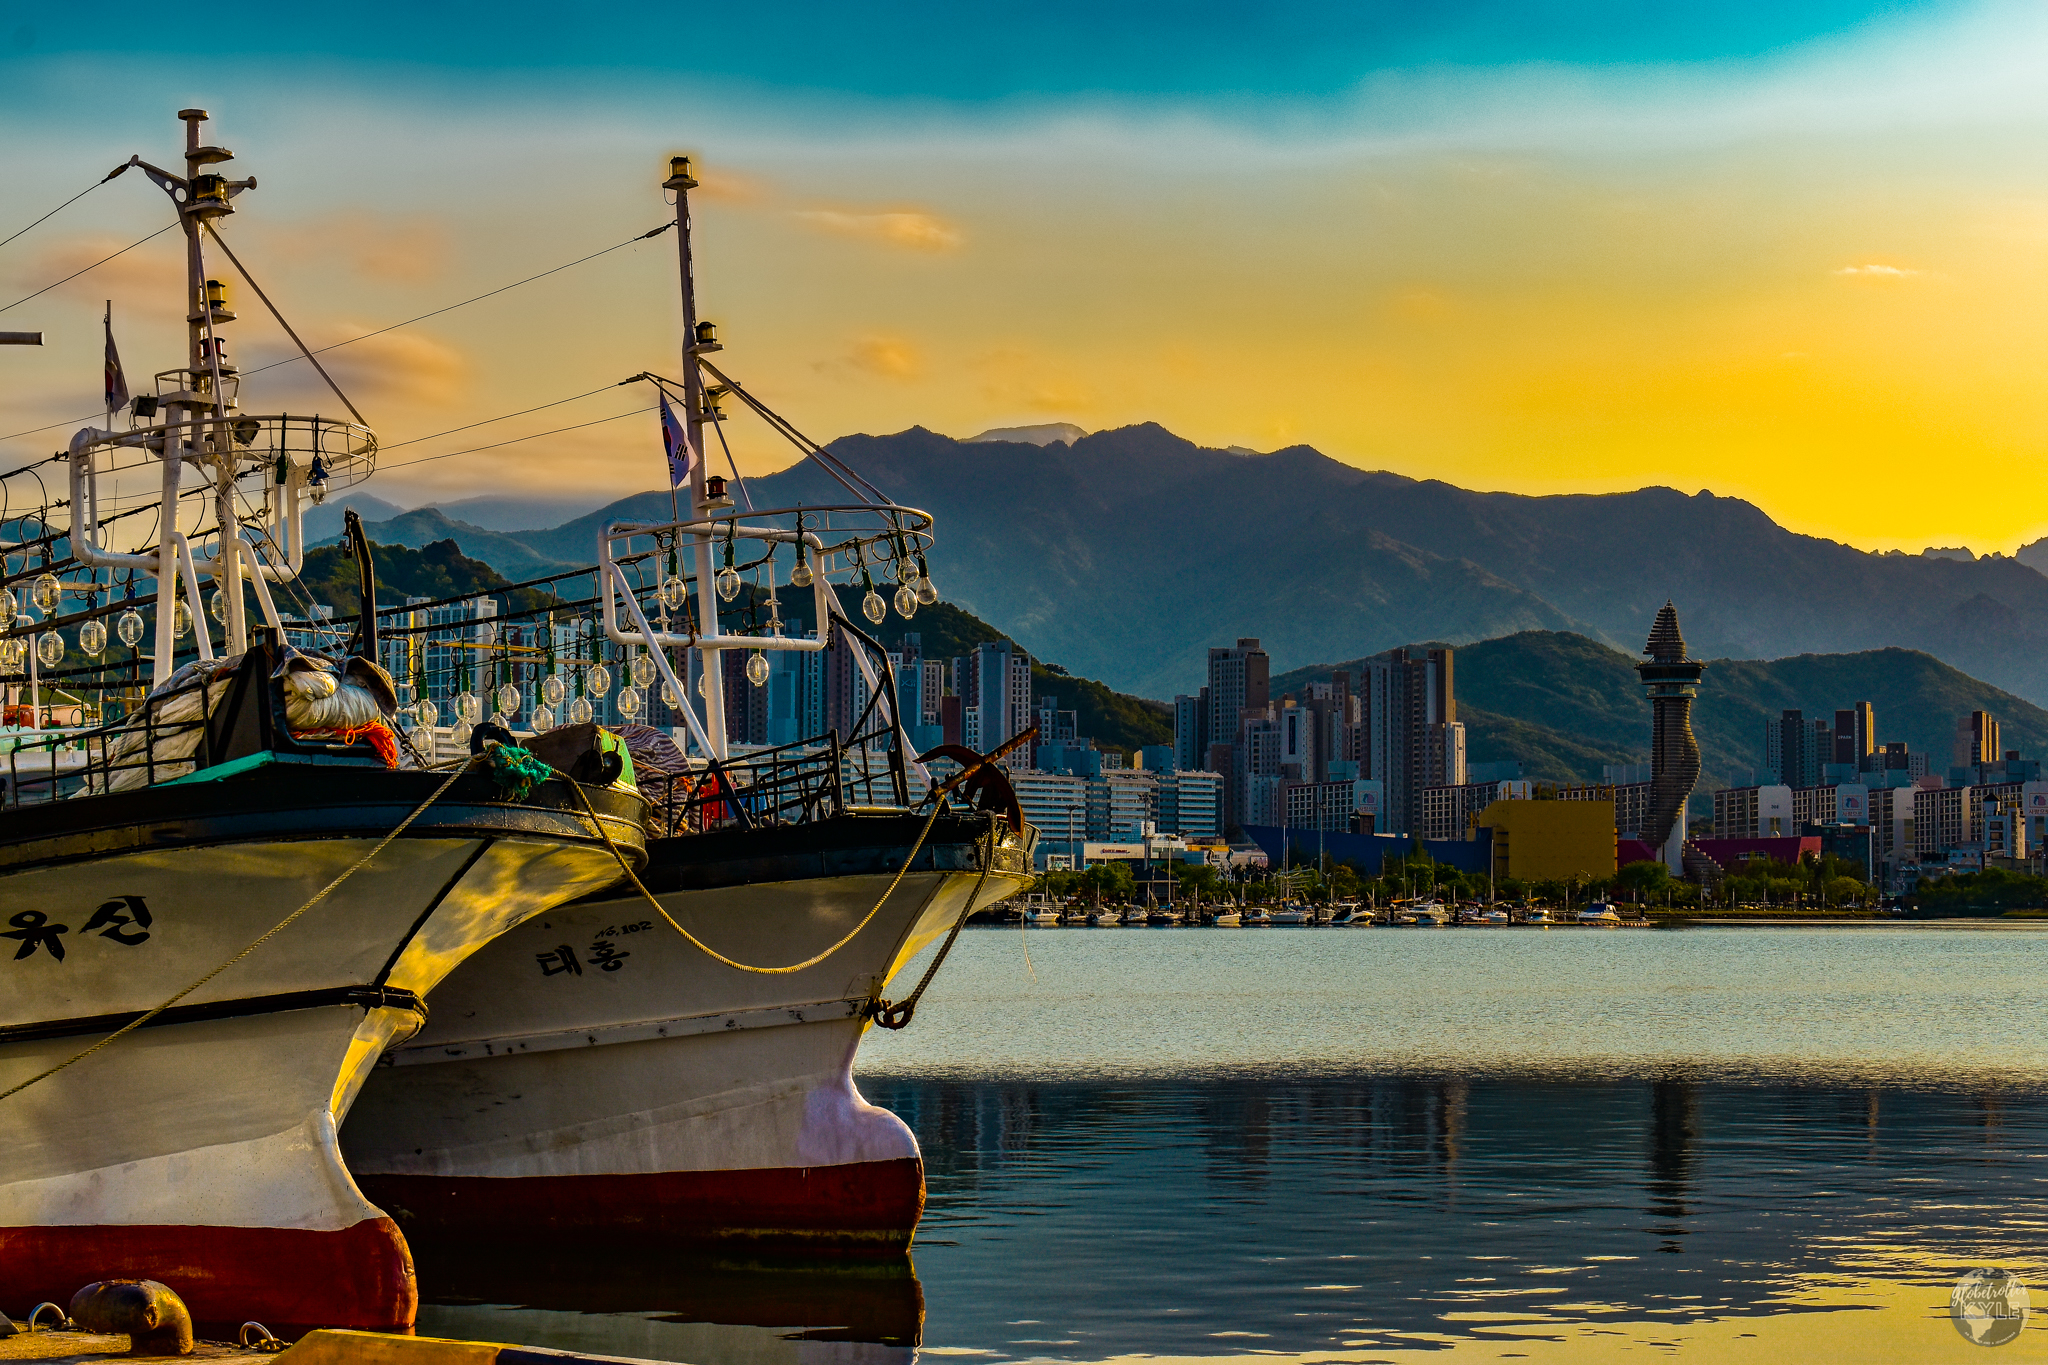 Two boats at rest in the Cheongcho Lake harbor in front of a cityscape below a yellow and orange sky made from the sun setting behind a mountain range Guide for Sokcho and Seoraksan